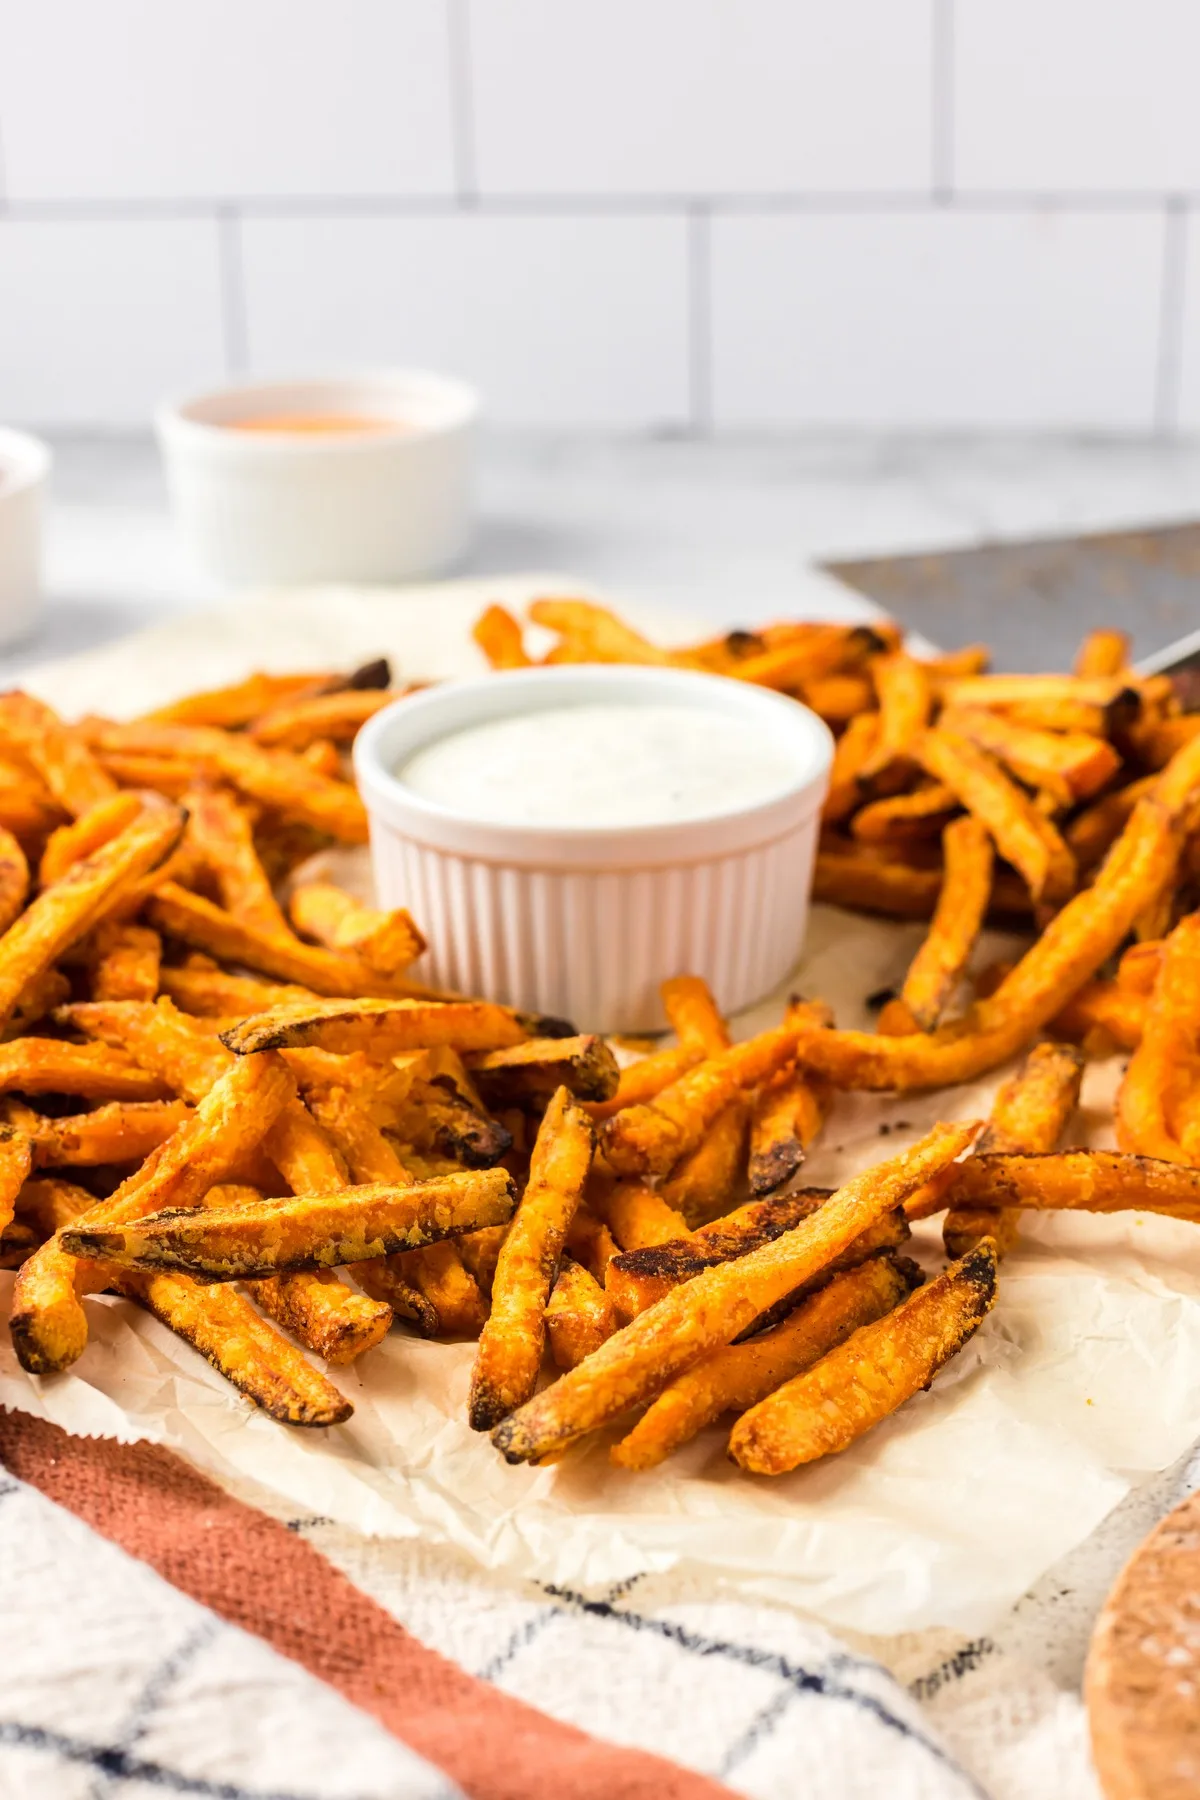 sweet potato fries with sauce in the middle